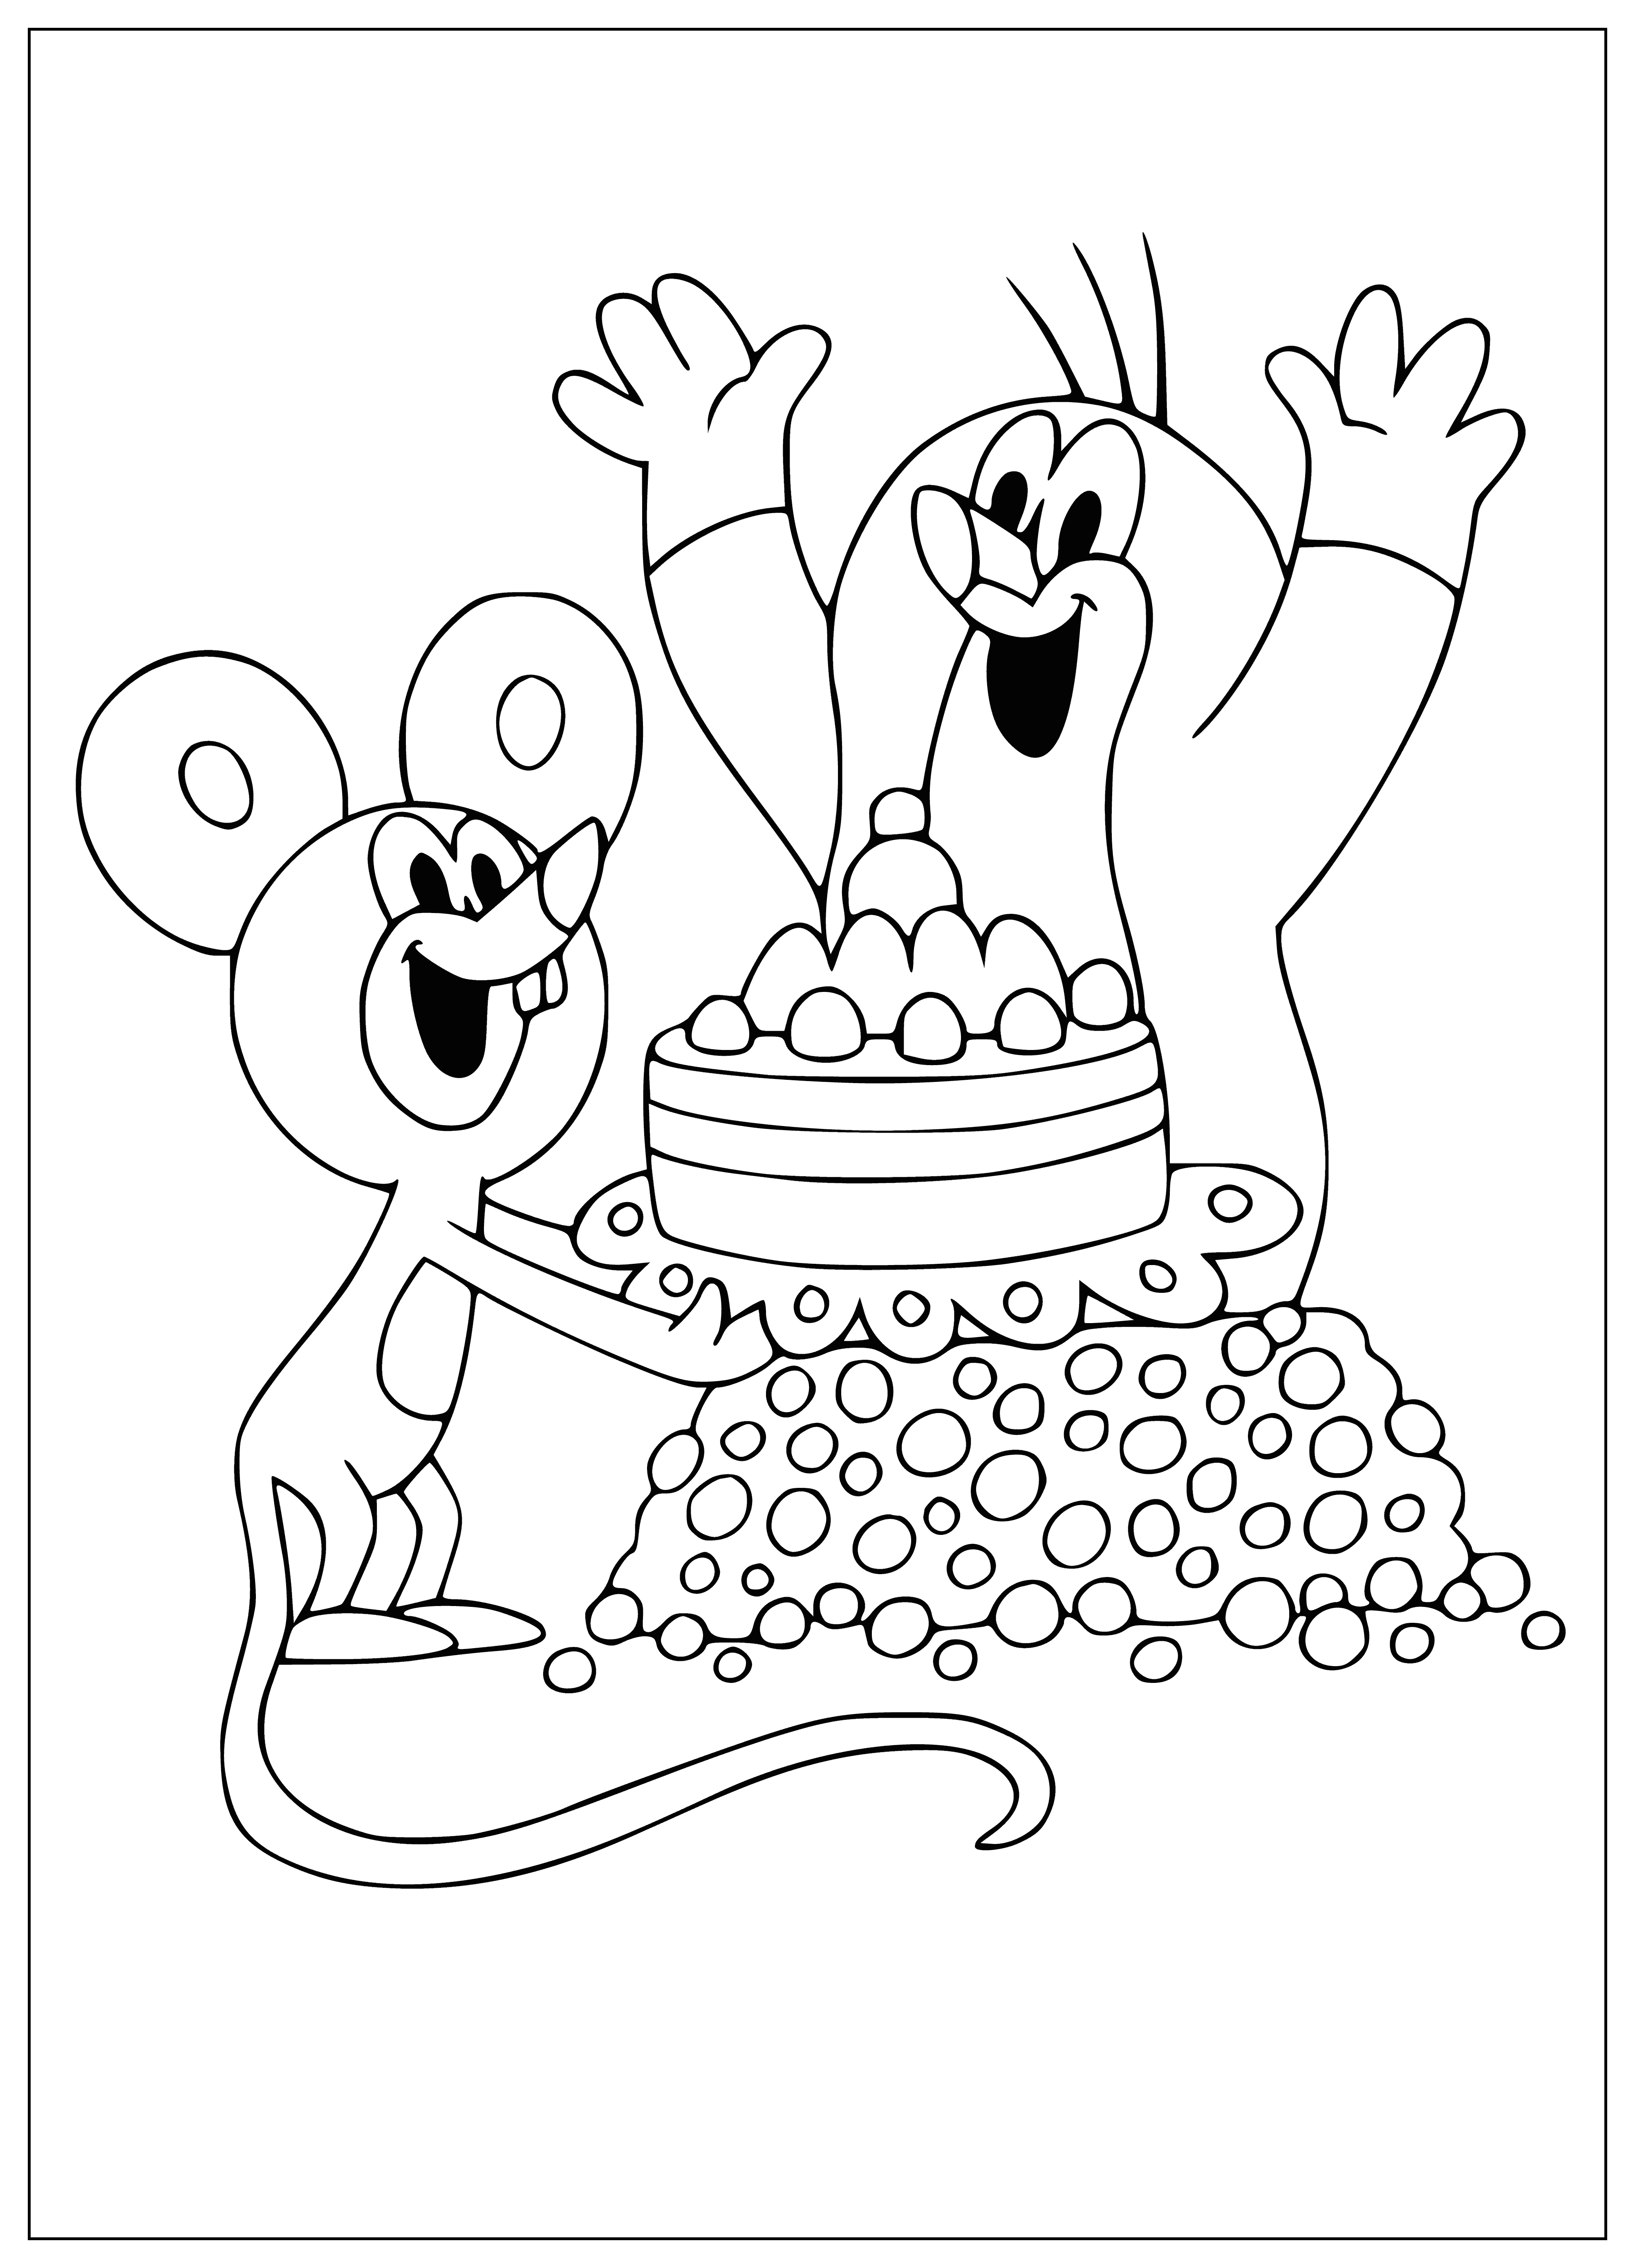 Cake for the Mole coloring page